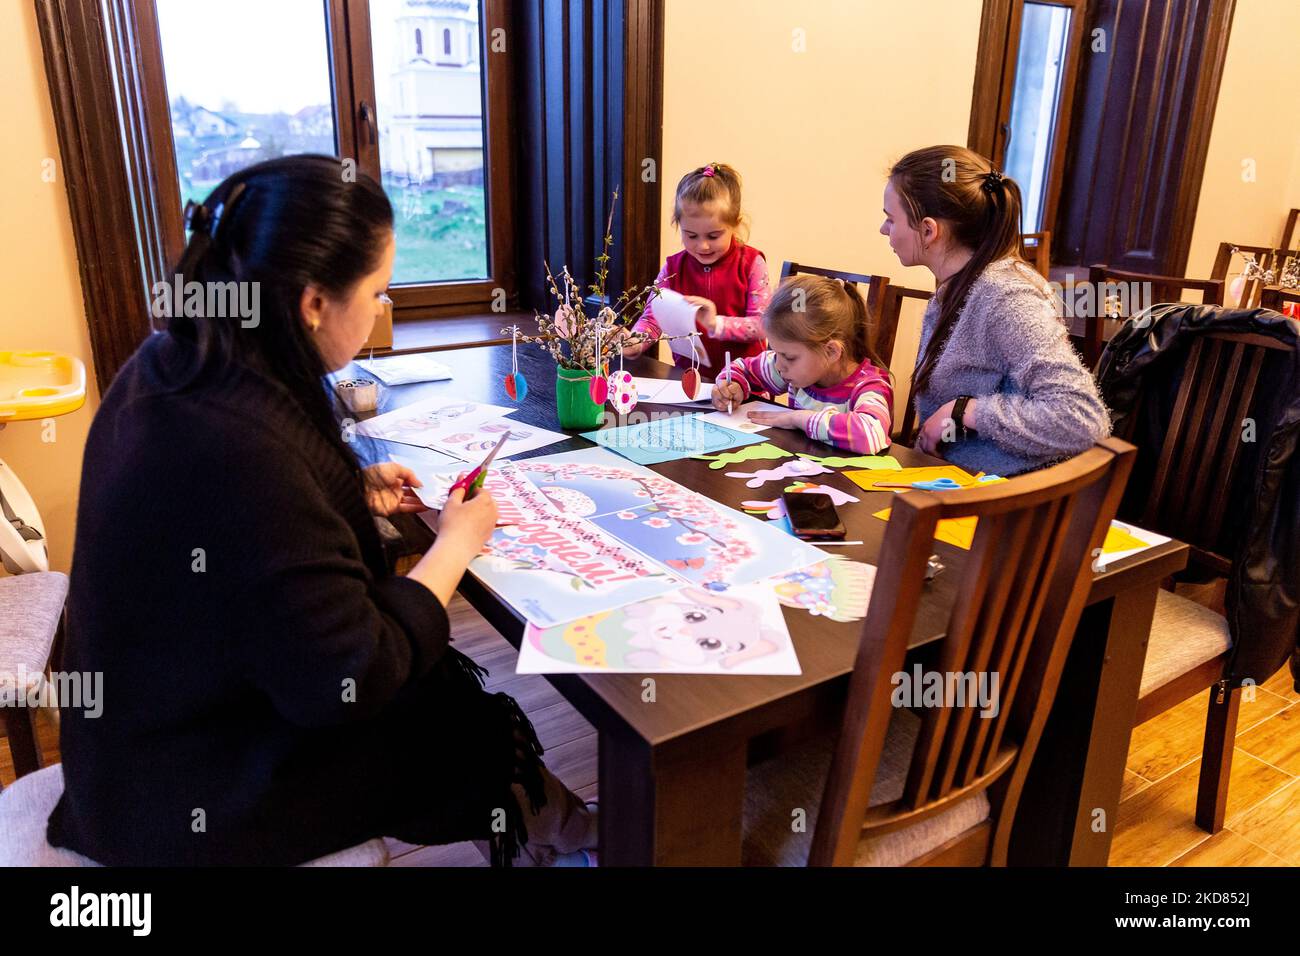 Ukrainian volunteer Krystyna prepares Easter decorations with domestic refugees who escaped from Kharkiv area to relative safety of Nadyby, Lviv Oblast, Ukraine on April 21, 2022. Since the Russian Federation invaded Ukraine, the conflict forced over 10 million people to flee their homes, both internally and externally. Greek-Catholic Church in Nadyby near Lviv hosts dozens of mothers with children who fled the war in eastern part of Ukraine and supports many more refugees in the area. The families found shelter in the Center for the Pastoral Care of Priests and Monks in Nadyby. (Photo by Domi Stock Photo